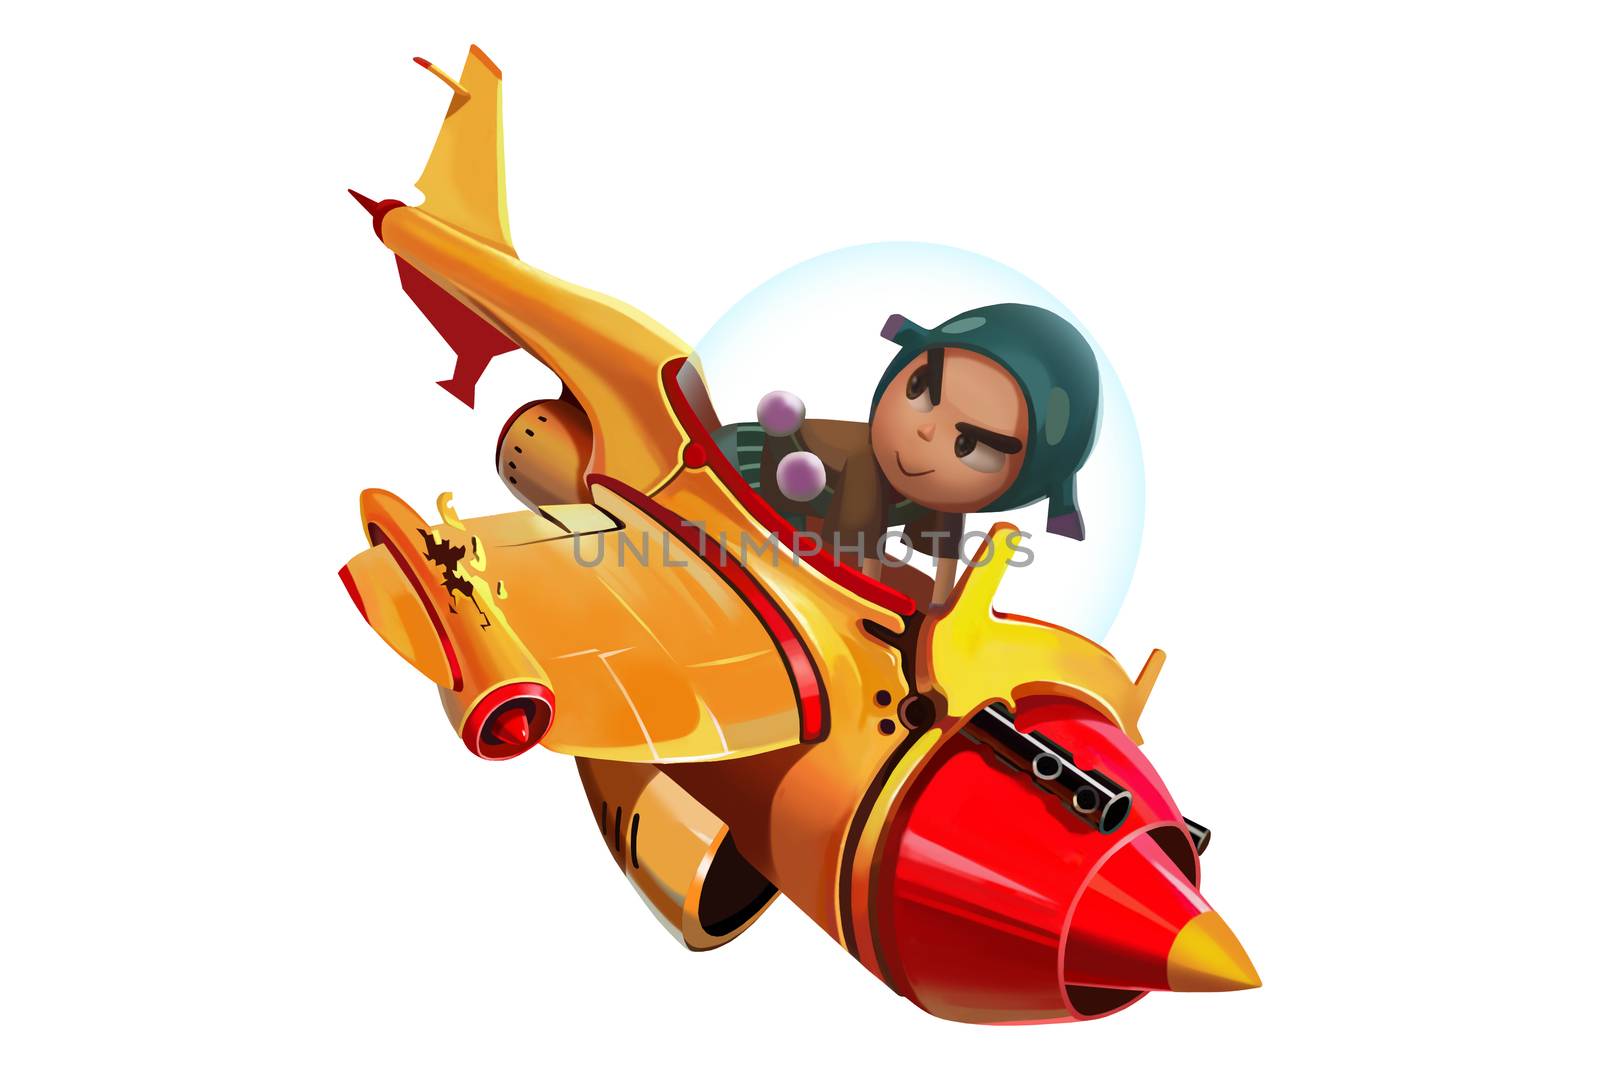 Illustration: The Brave Boy Piloted his Aircraft into more distant destinations in space. Story with Fantastic Cartoon Style Character Design.